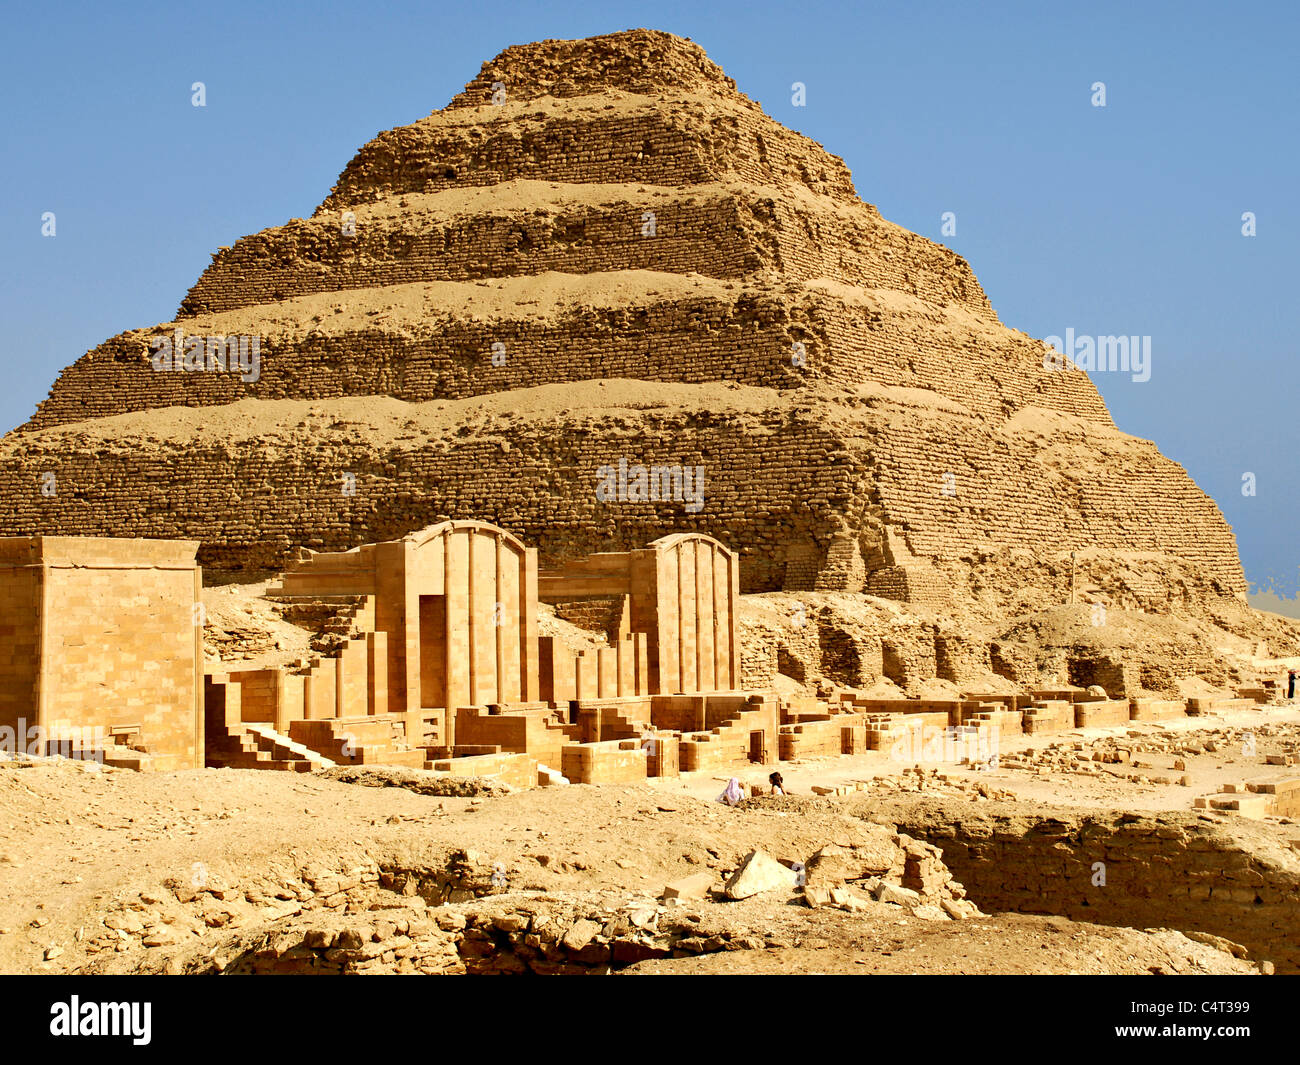 First Pyramid In Egypt